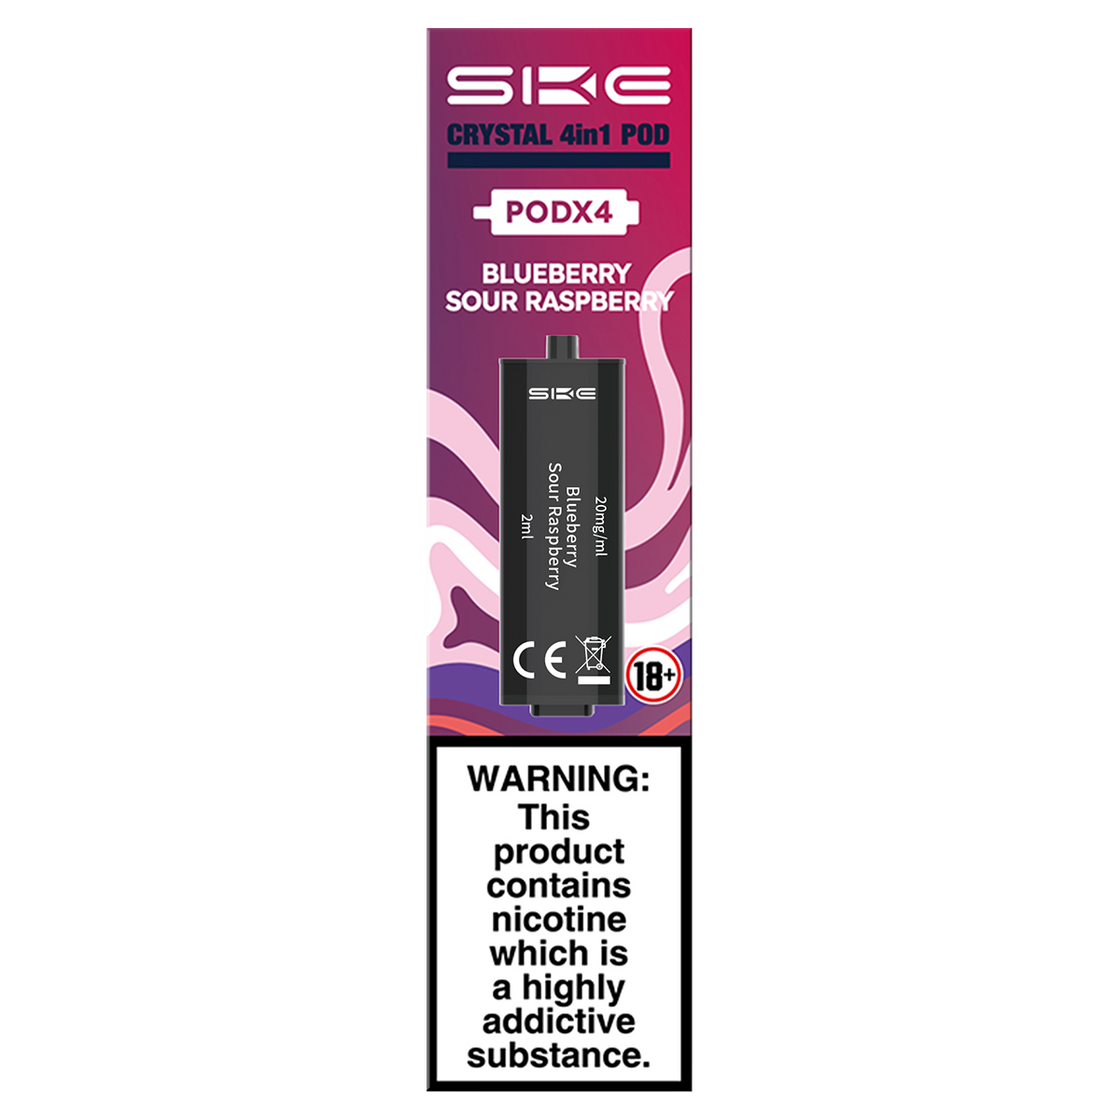 BLUEBERRY SOUR RASPBERRY - SKE CRYSTAL 4IN1 PODS - PACK OF 4